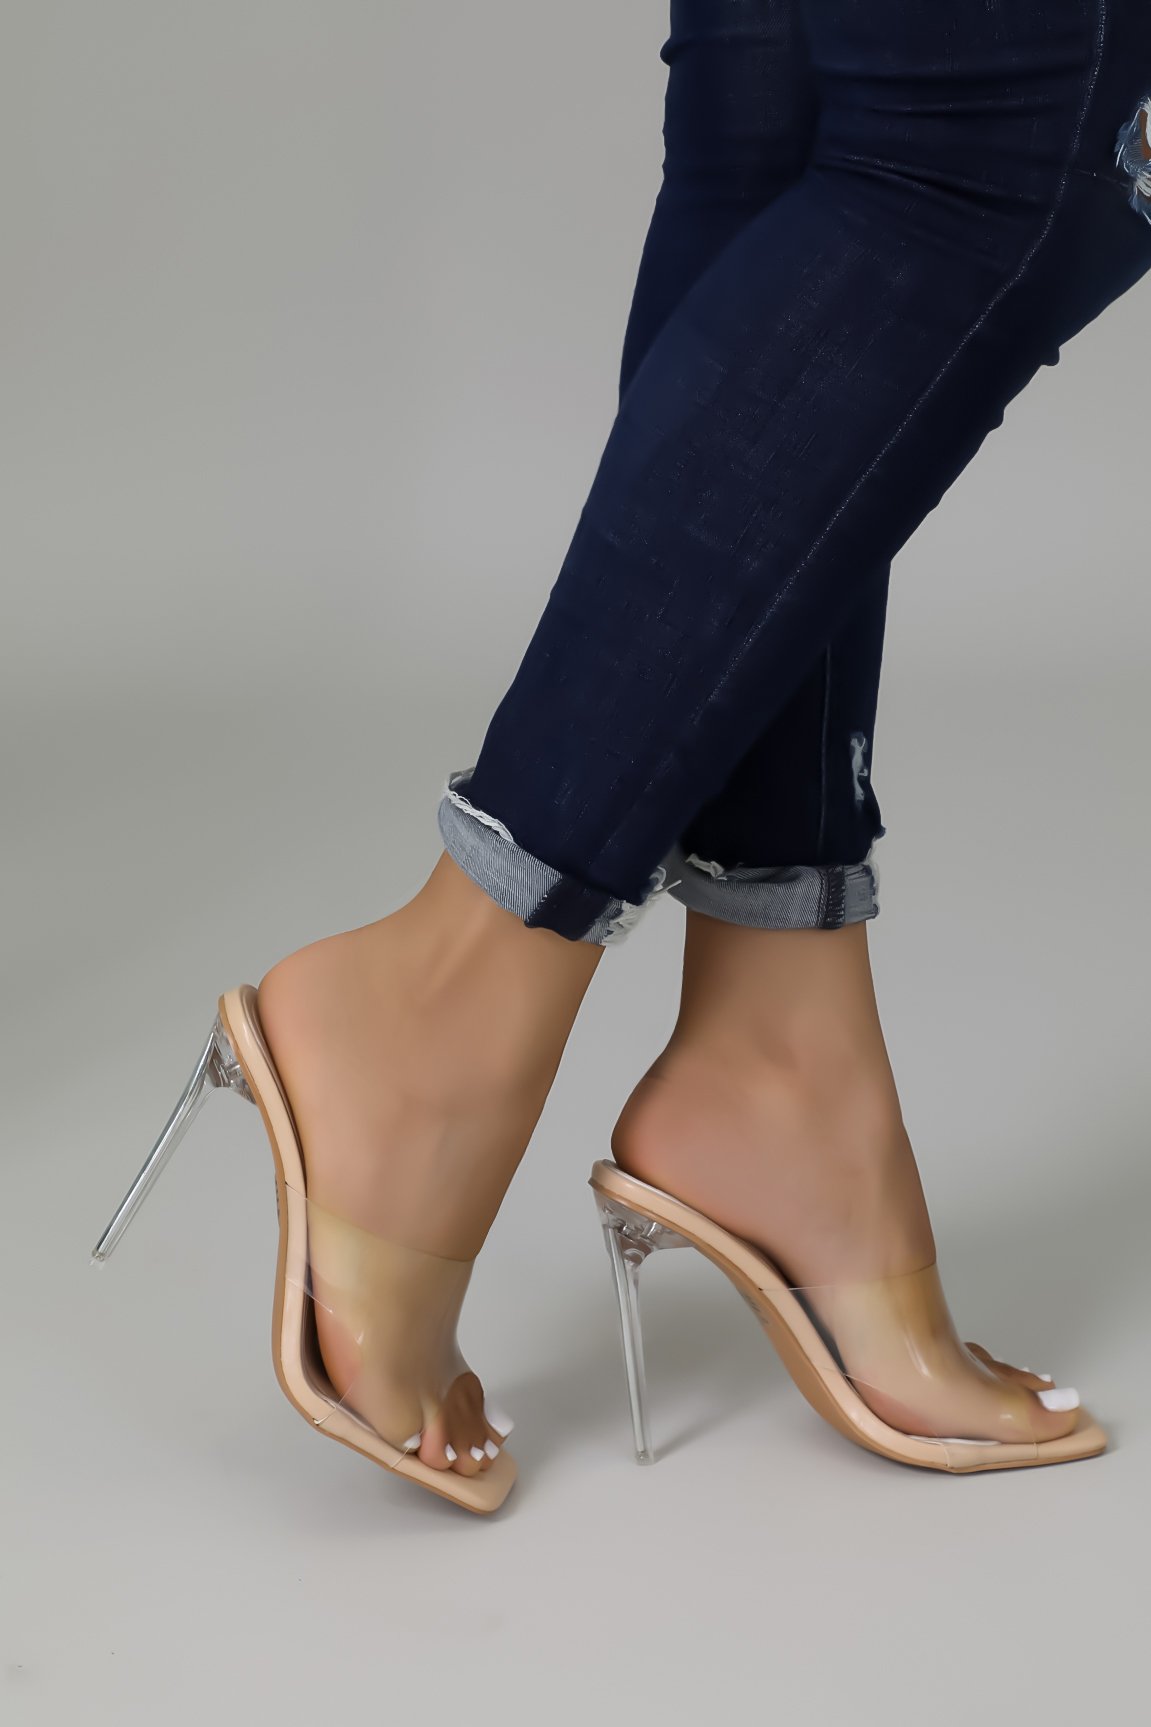 Clear Intentions Heels